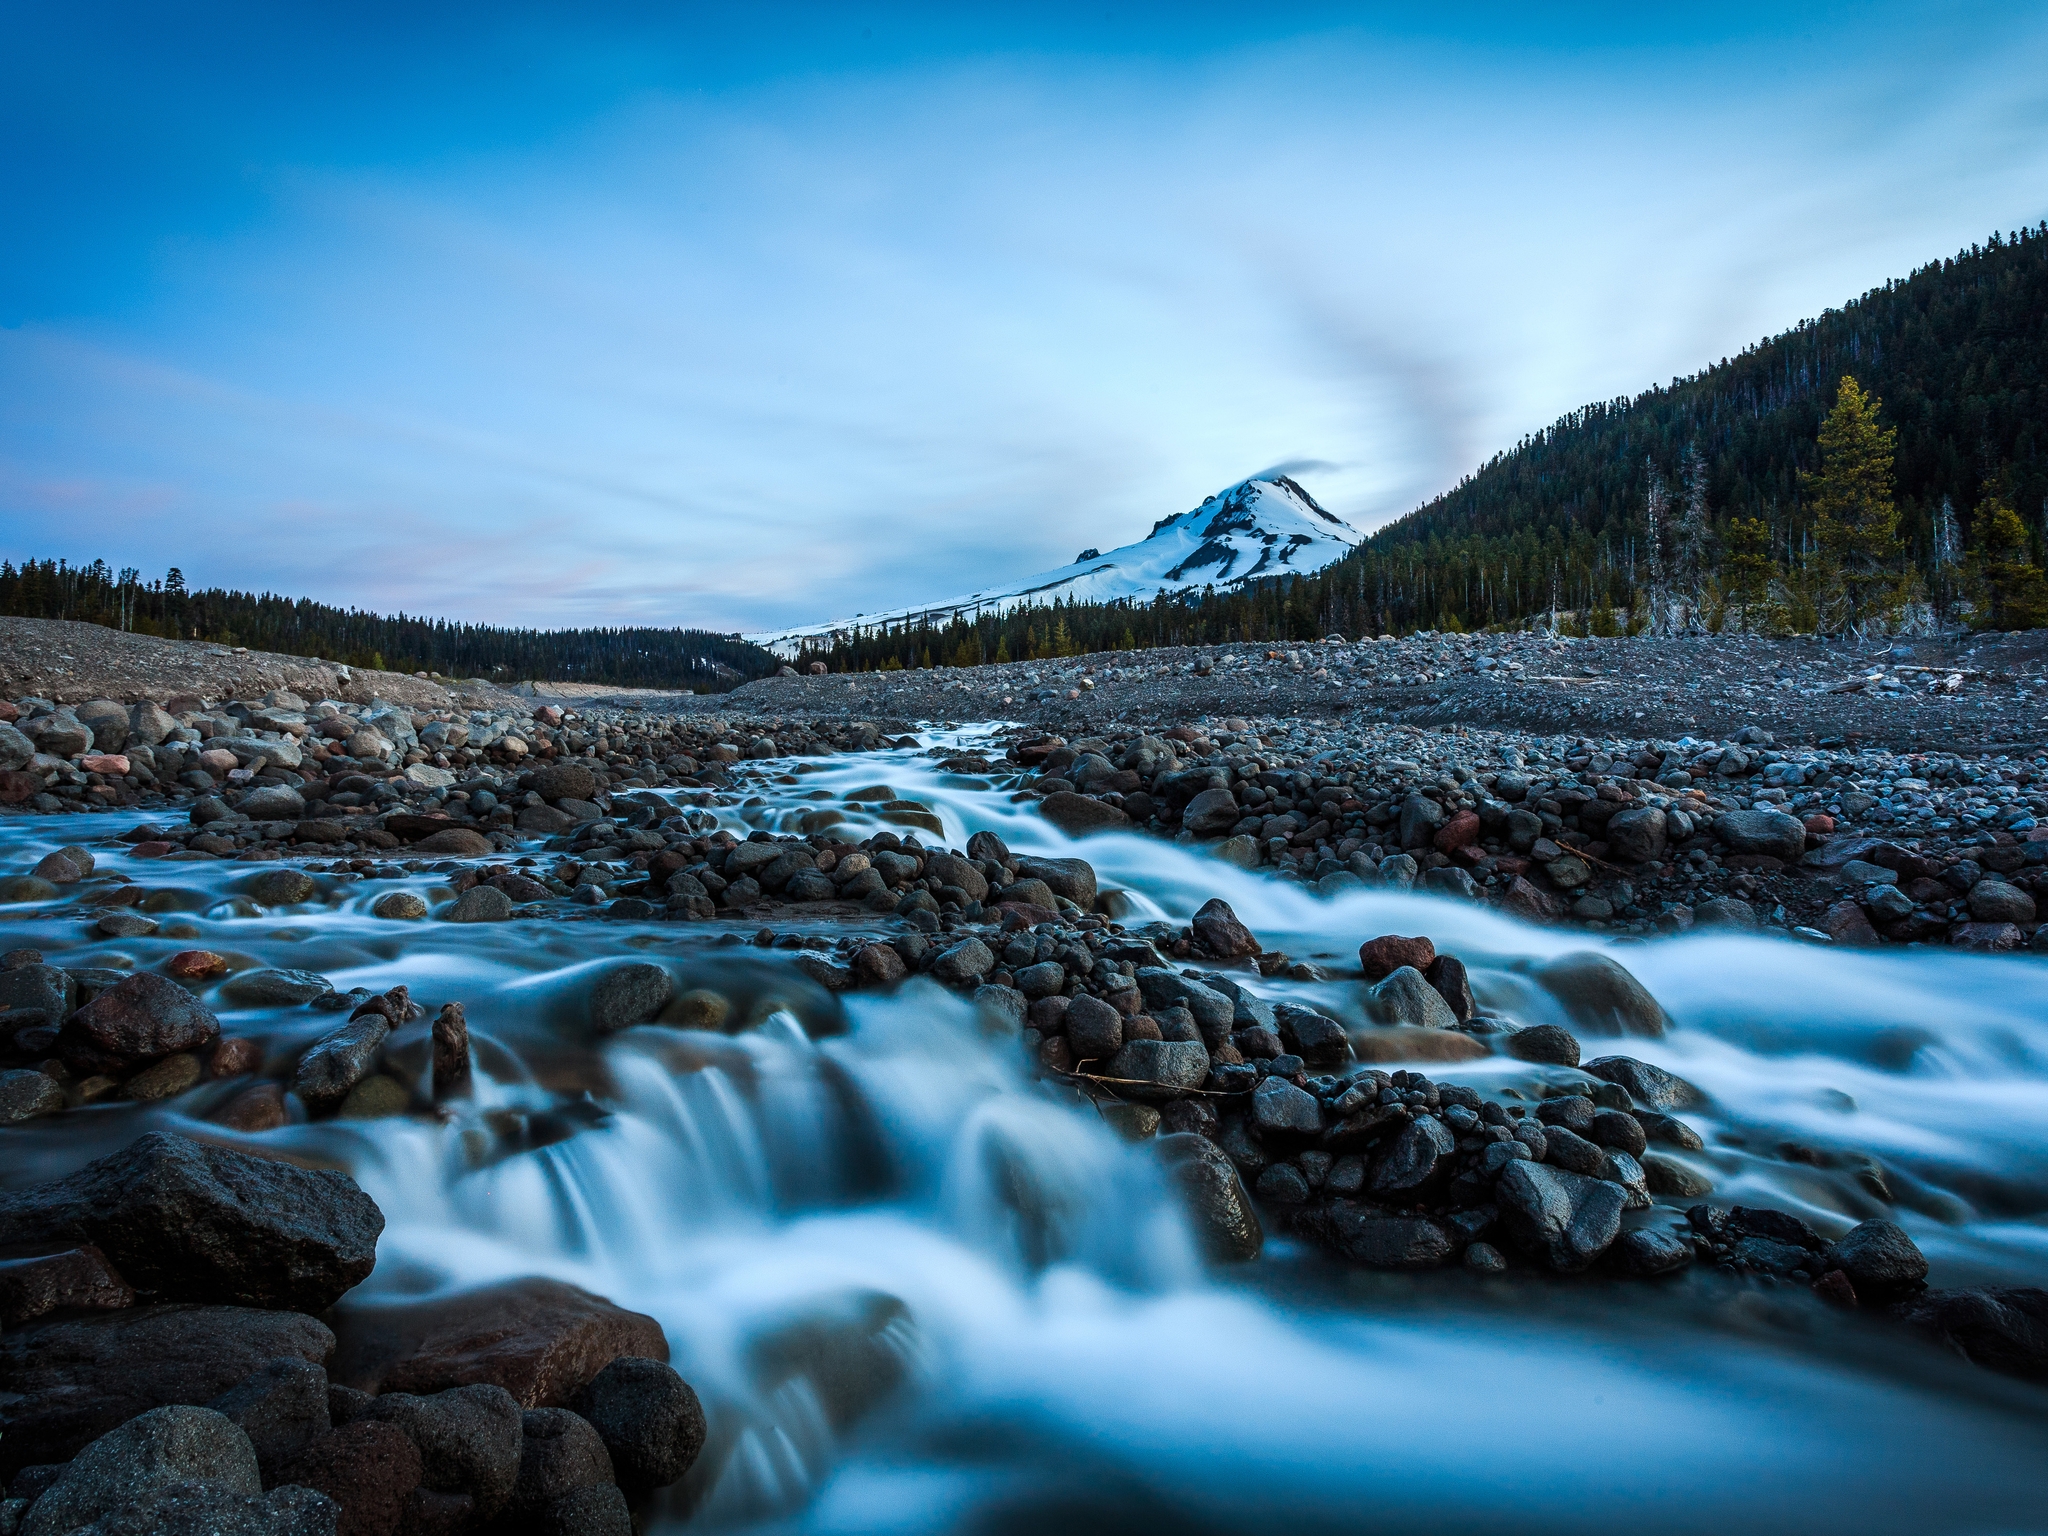 Image: Stones, water, flow, current, sky, mountains, forest